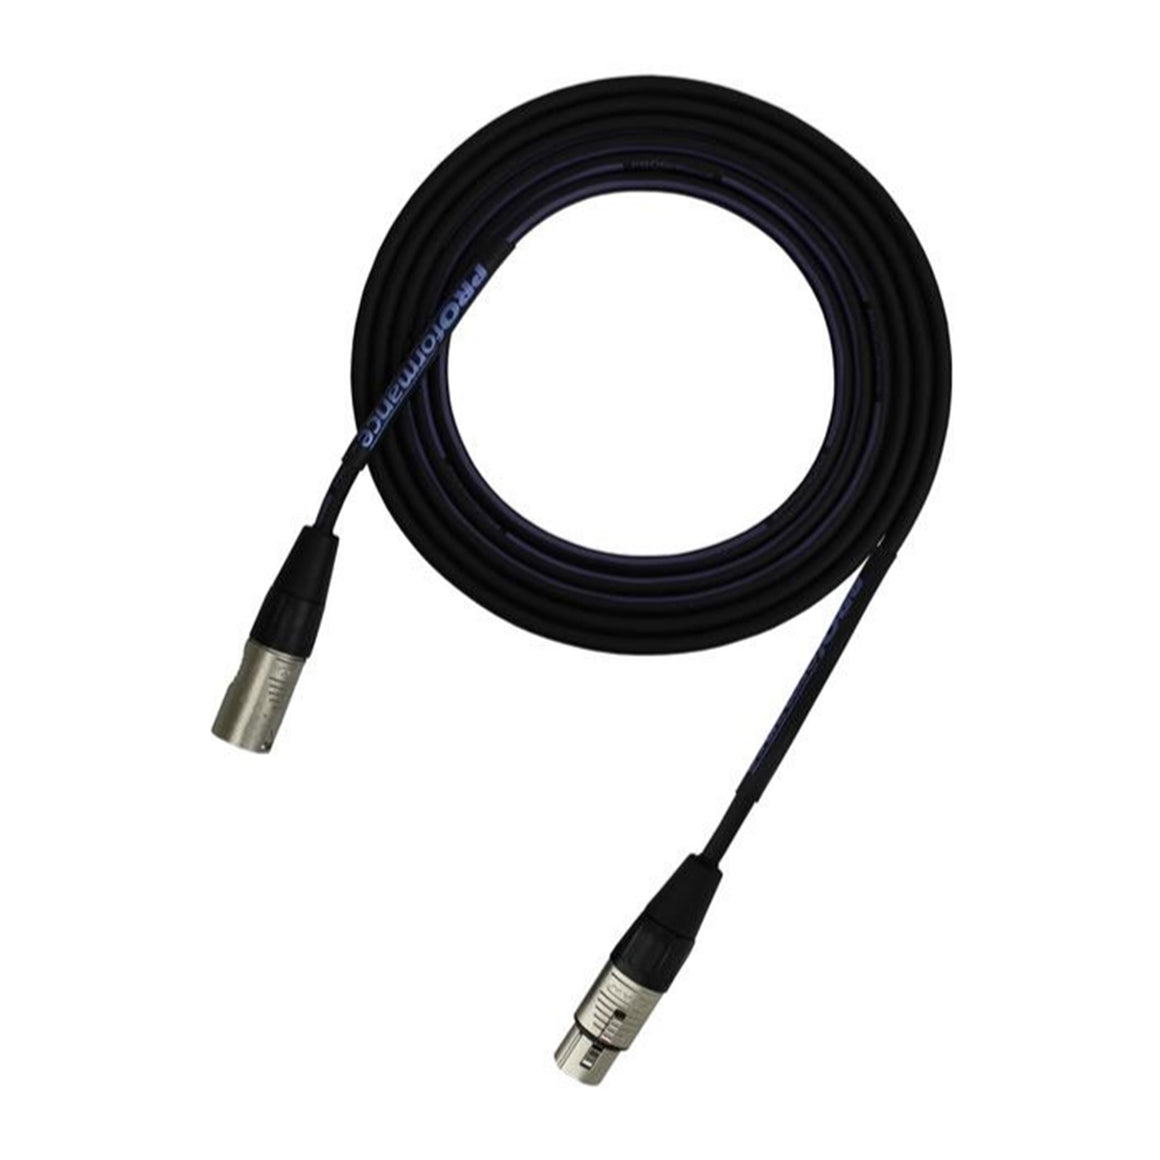 PROformance AJP25 25' Microphone Cable